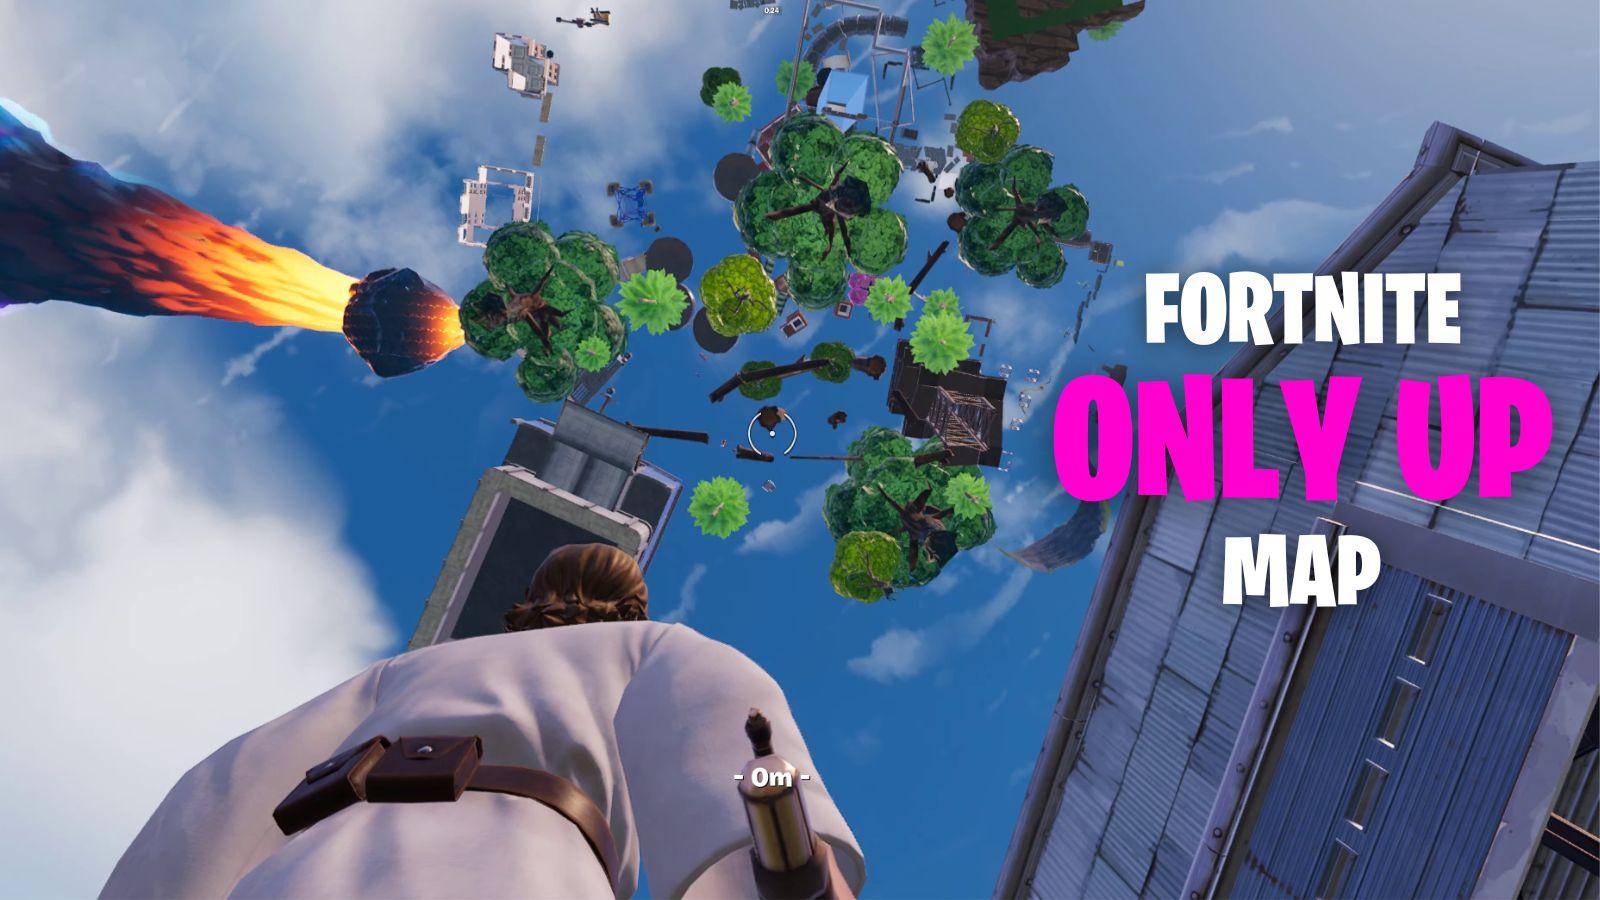 Onlydown - Fortnite Creative Parkour and Deathrun Map Code